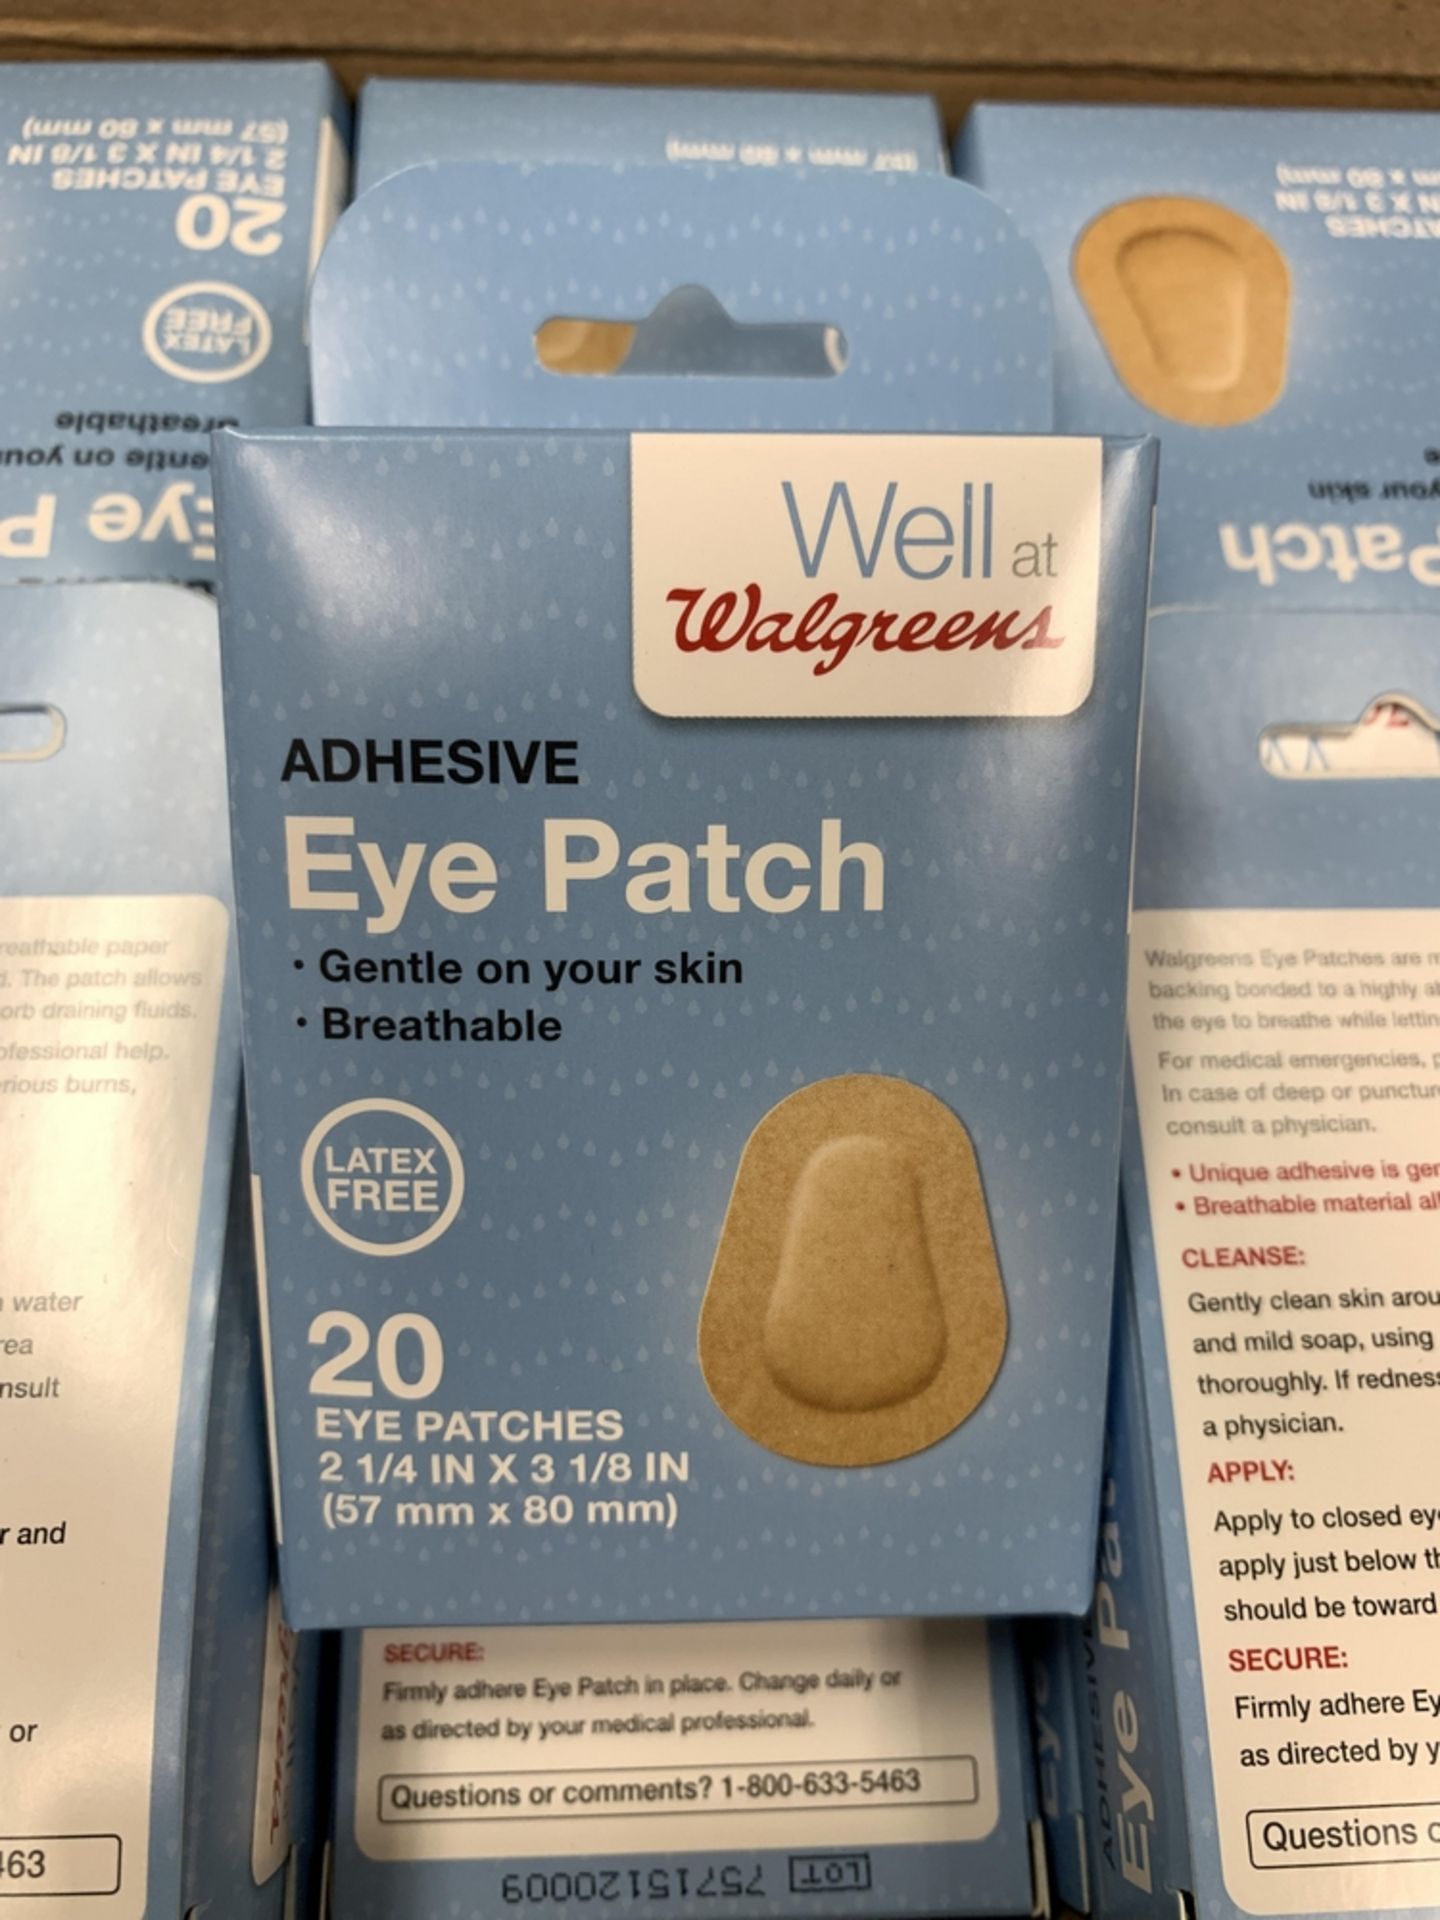 LOT OF 24 WALGREENS ADHESIVE EYE PATCHS, NEW IN BOX, 20 PER PACKAGE